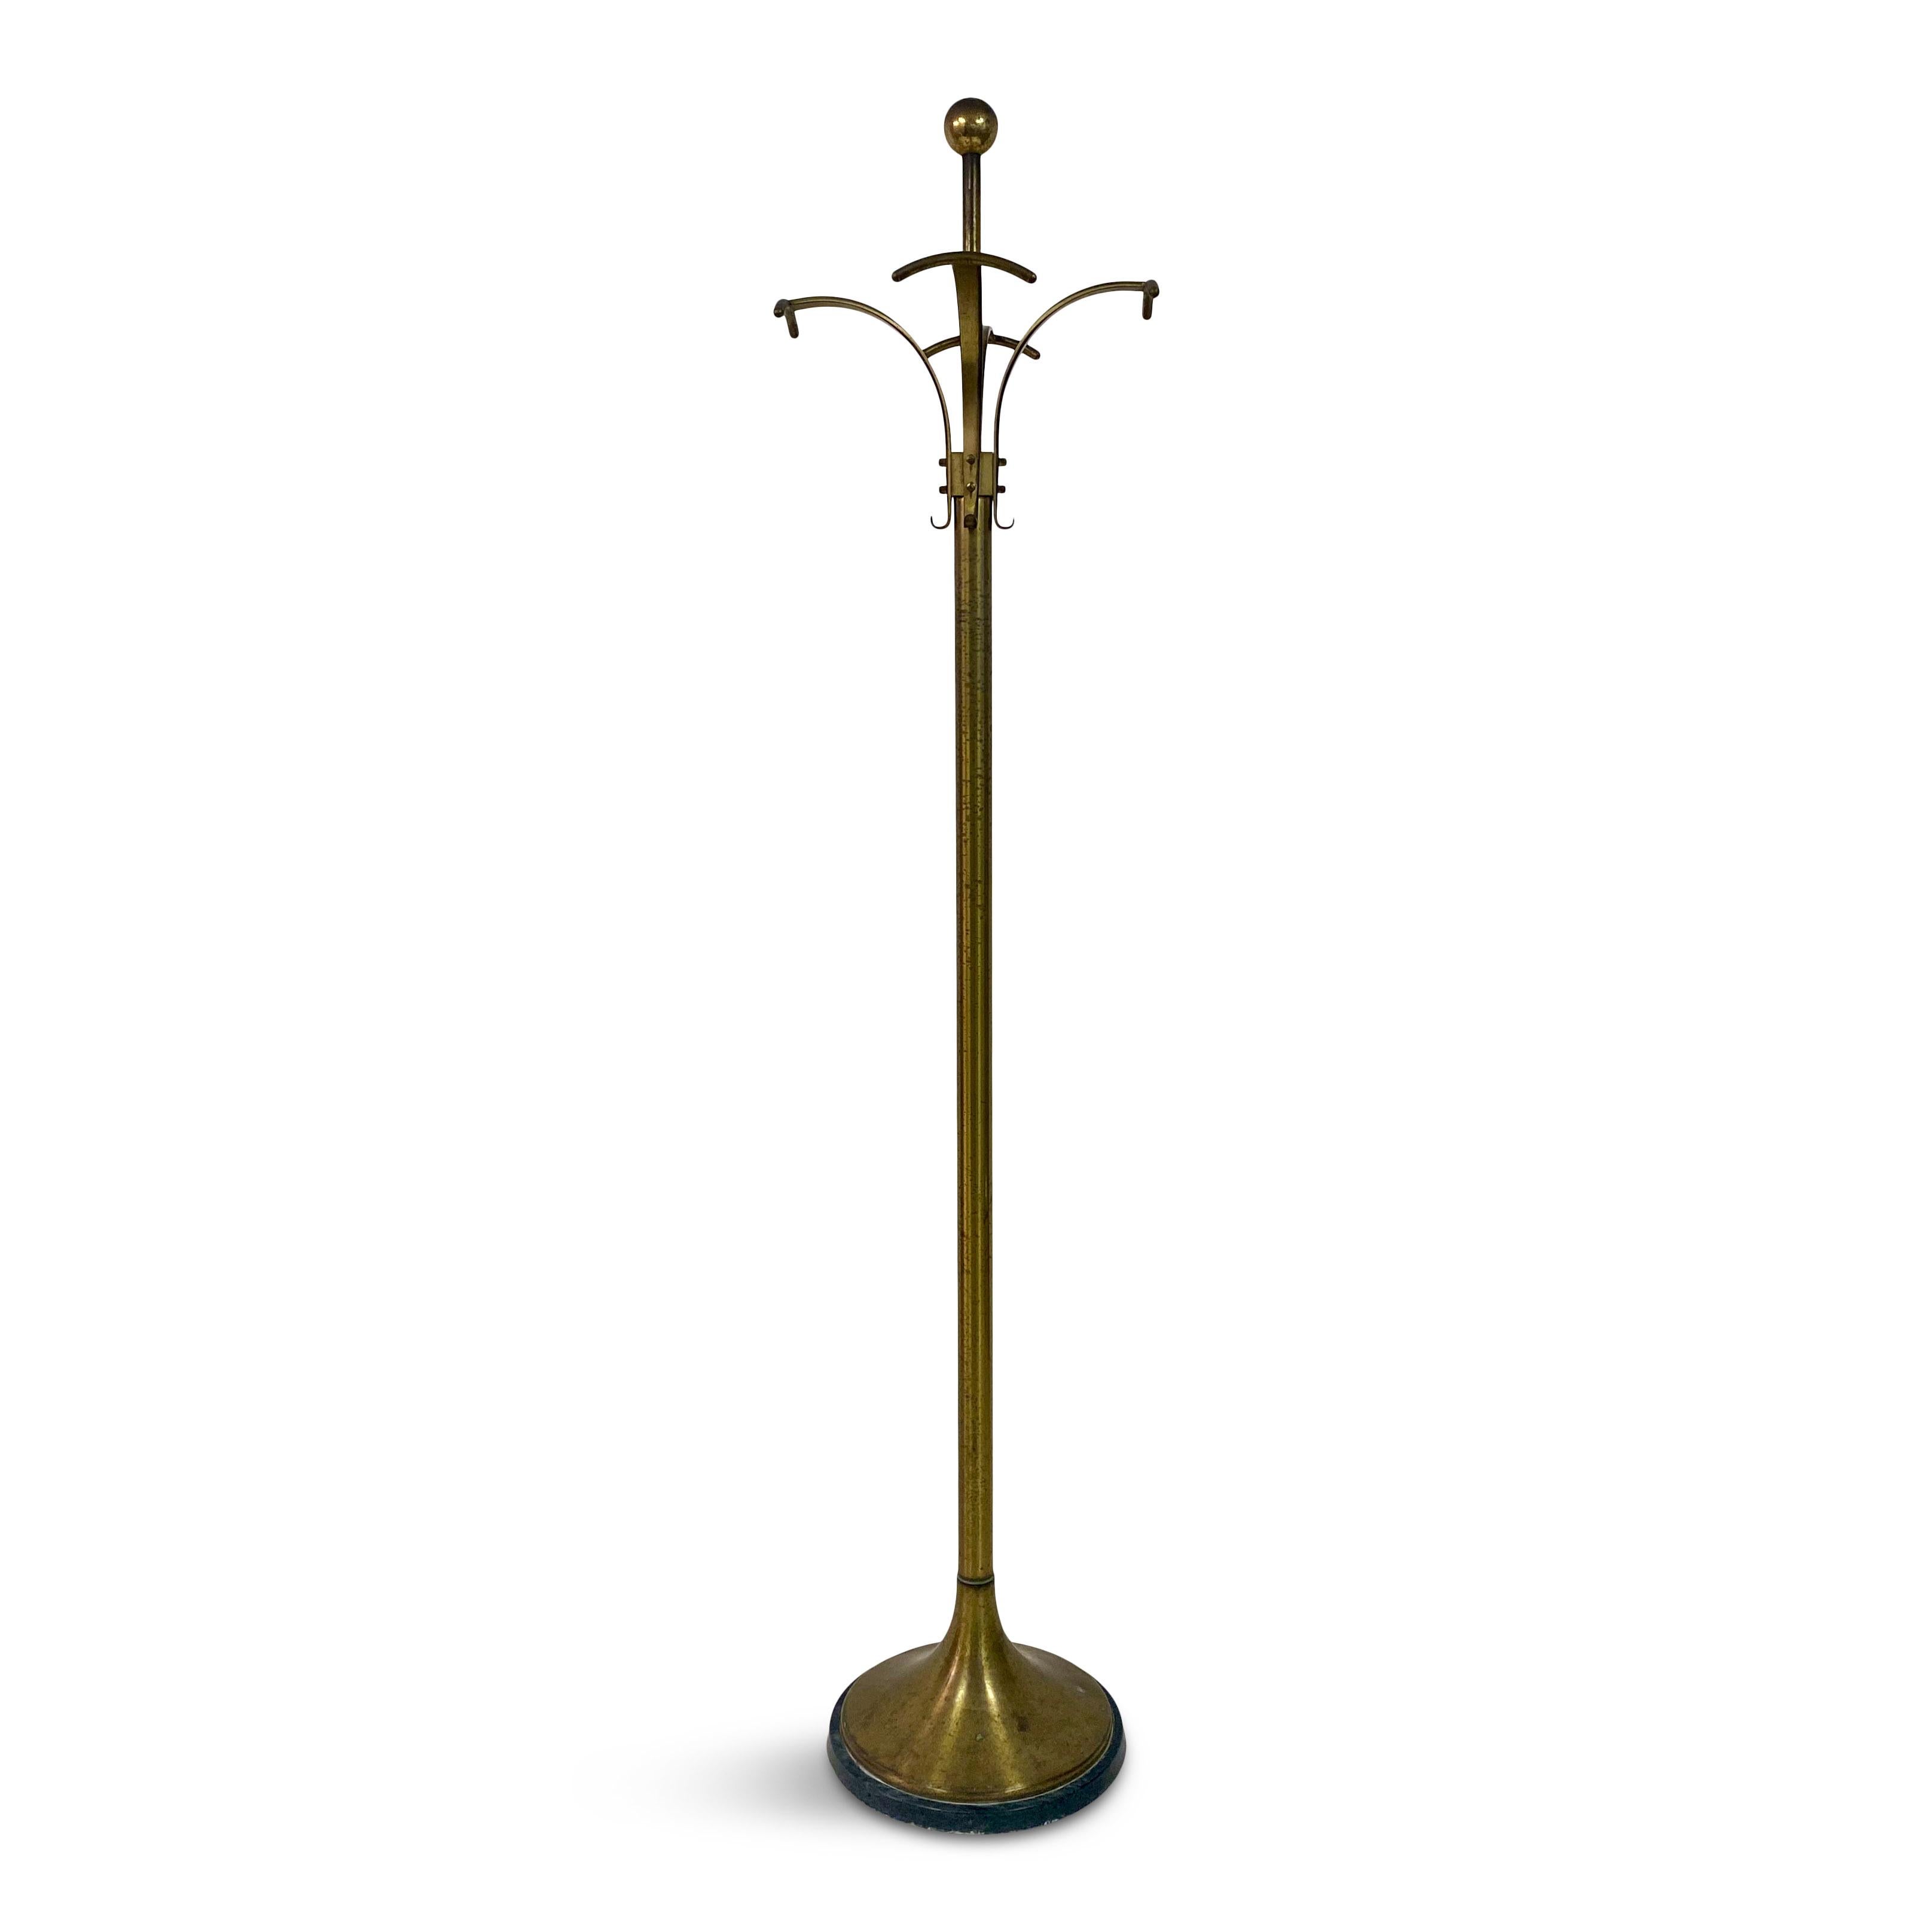 Coat stand or rack

Brass frame

Marble base

Italy 1950s